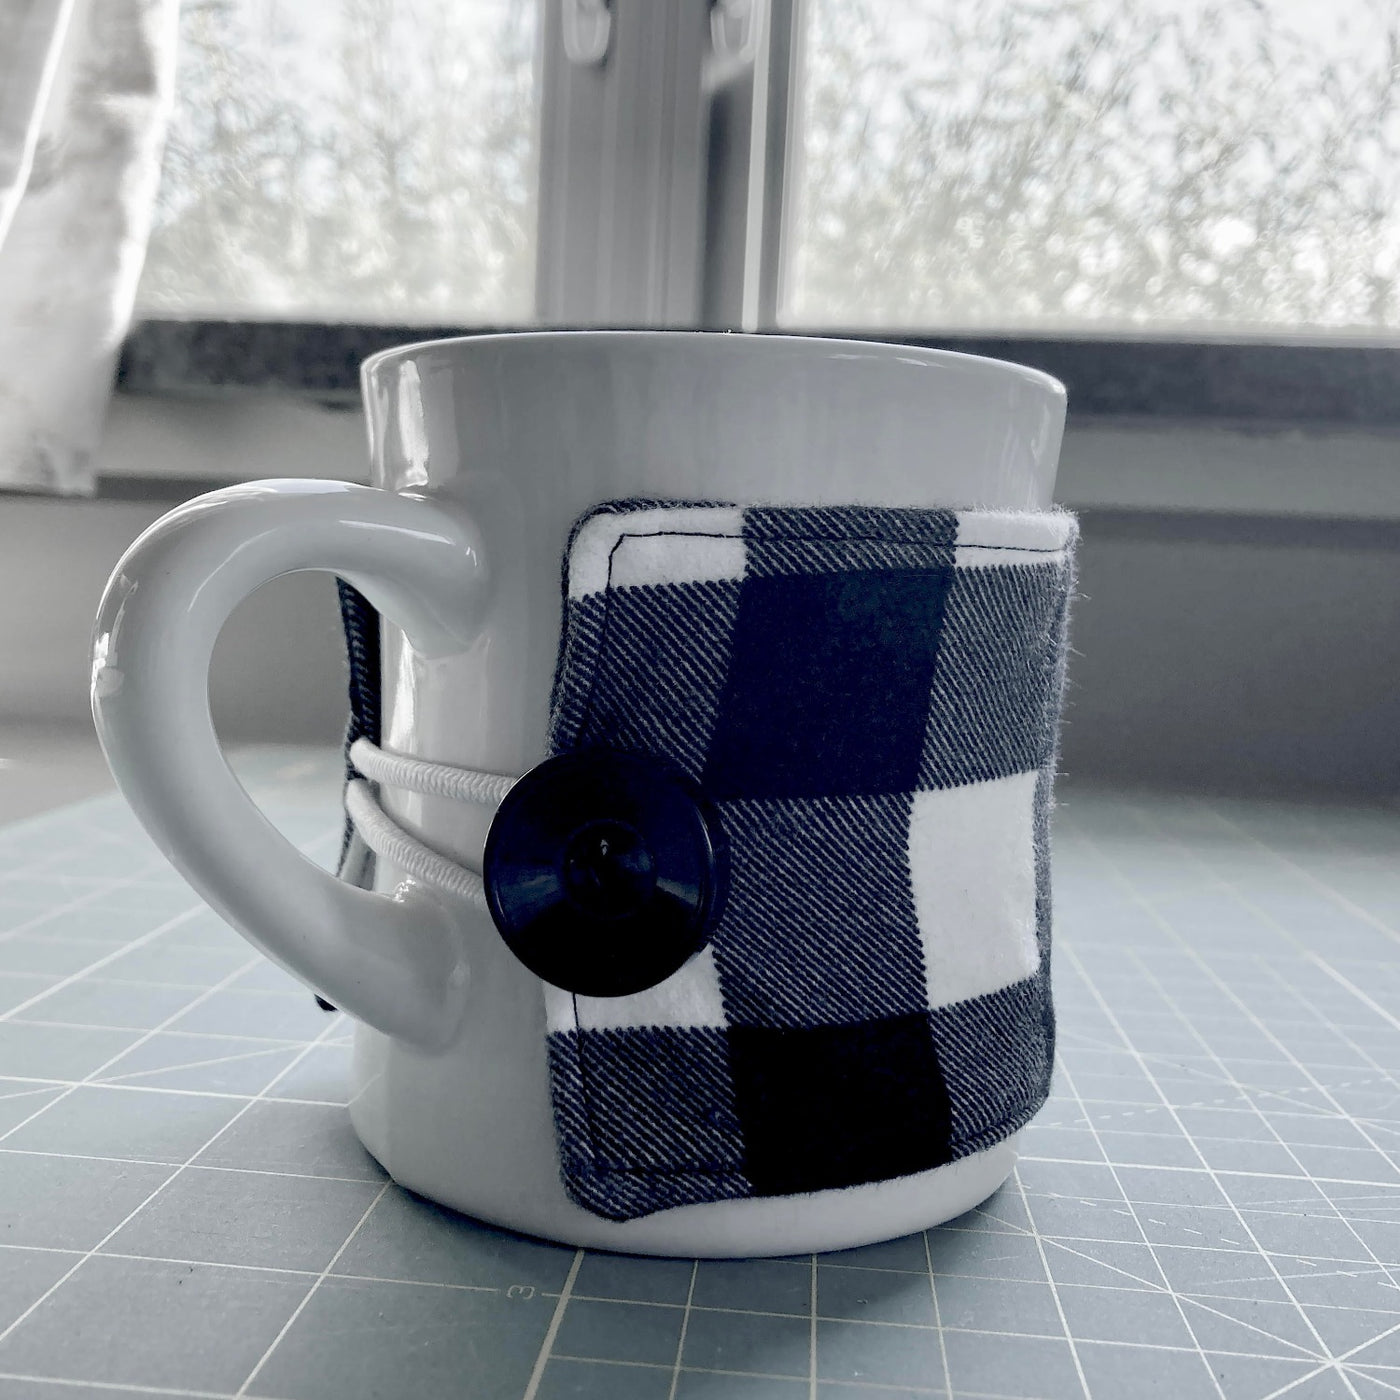 Cup or Mug Cozy - Free Downloadable Sewing Pattern